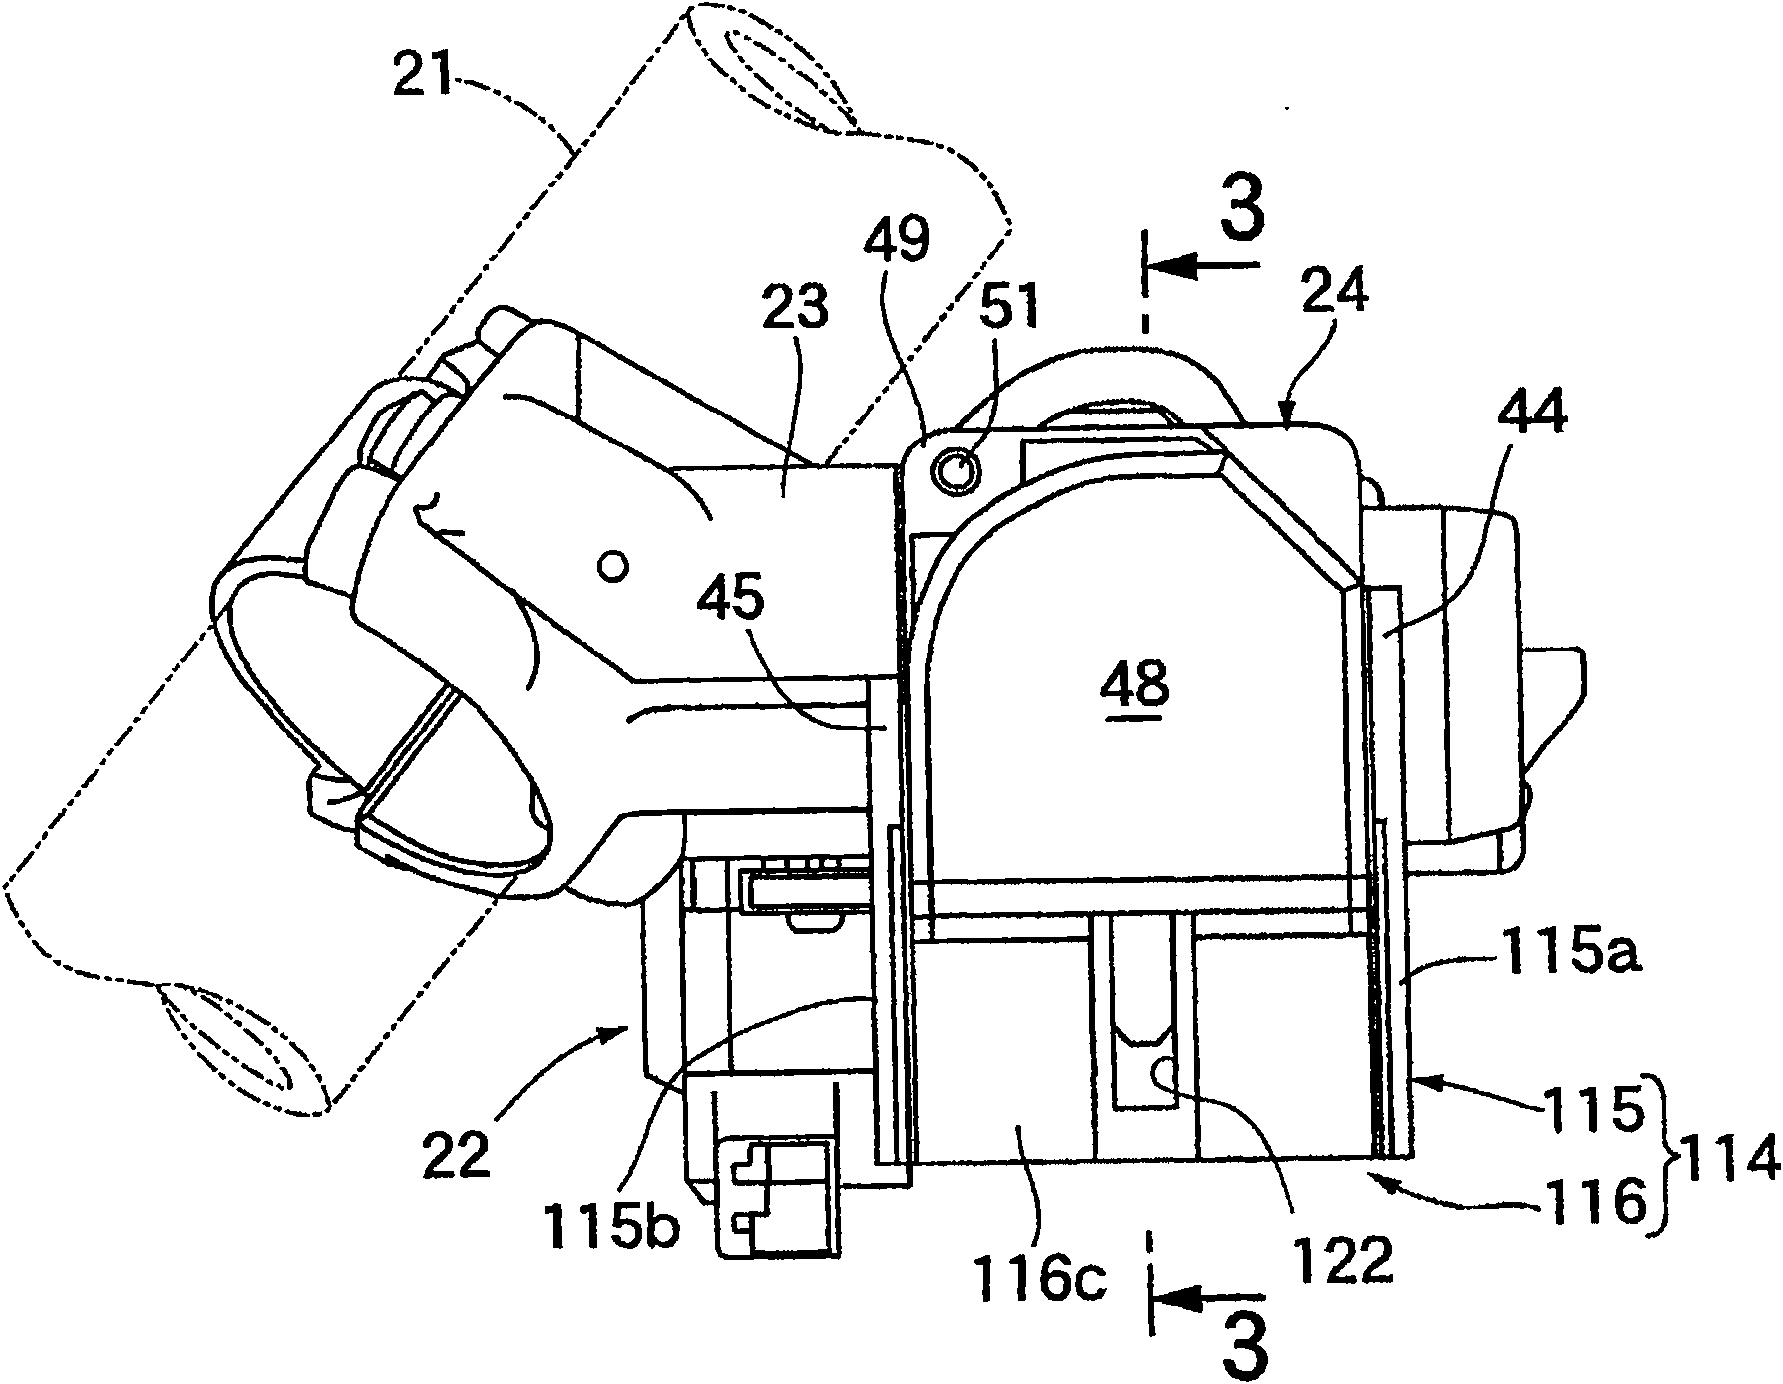 Rotary switch device